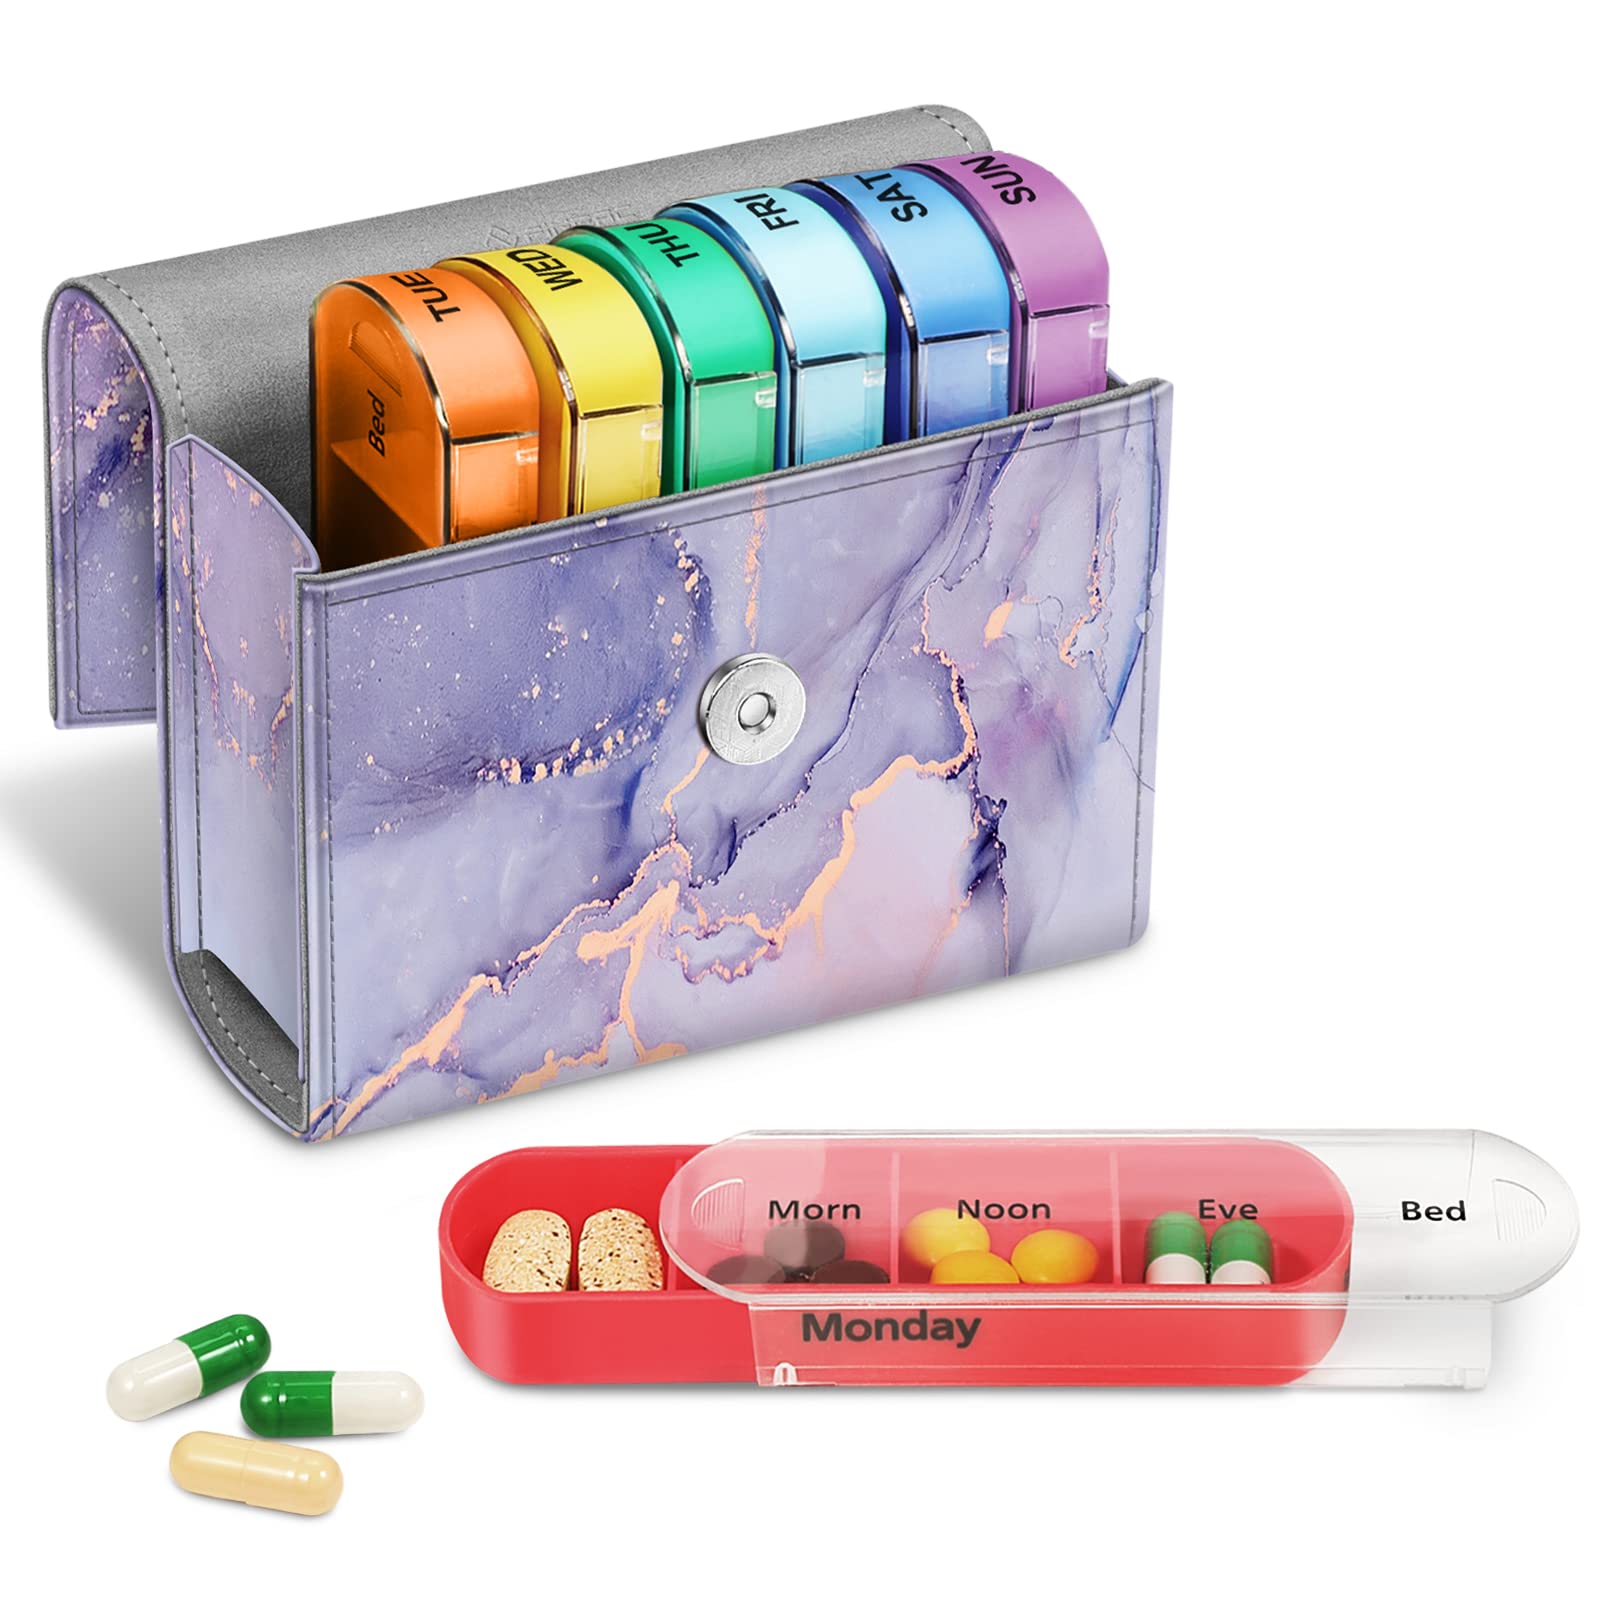 FINPAC Weekly Pill Organizers 4 Times A Day, Slide Open PU Leather